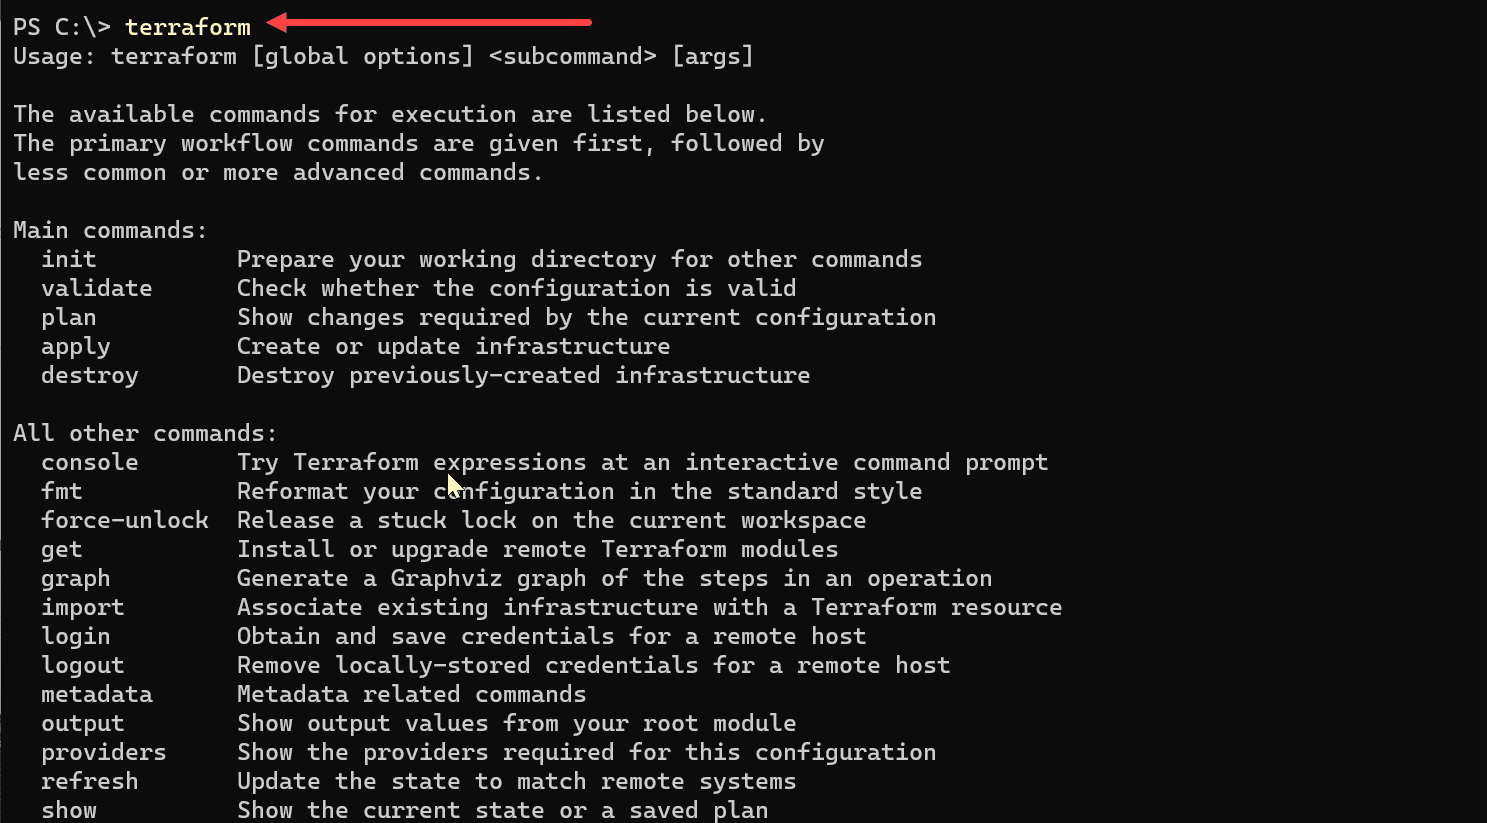 Running Terraform from the command line